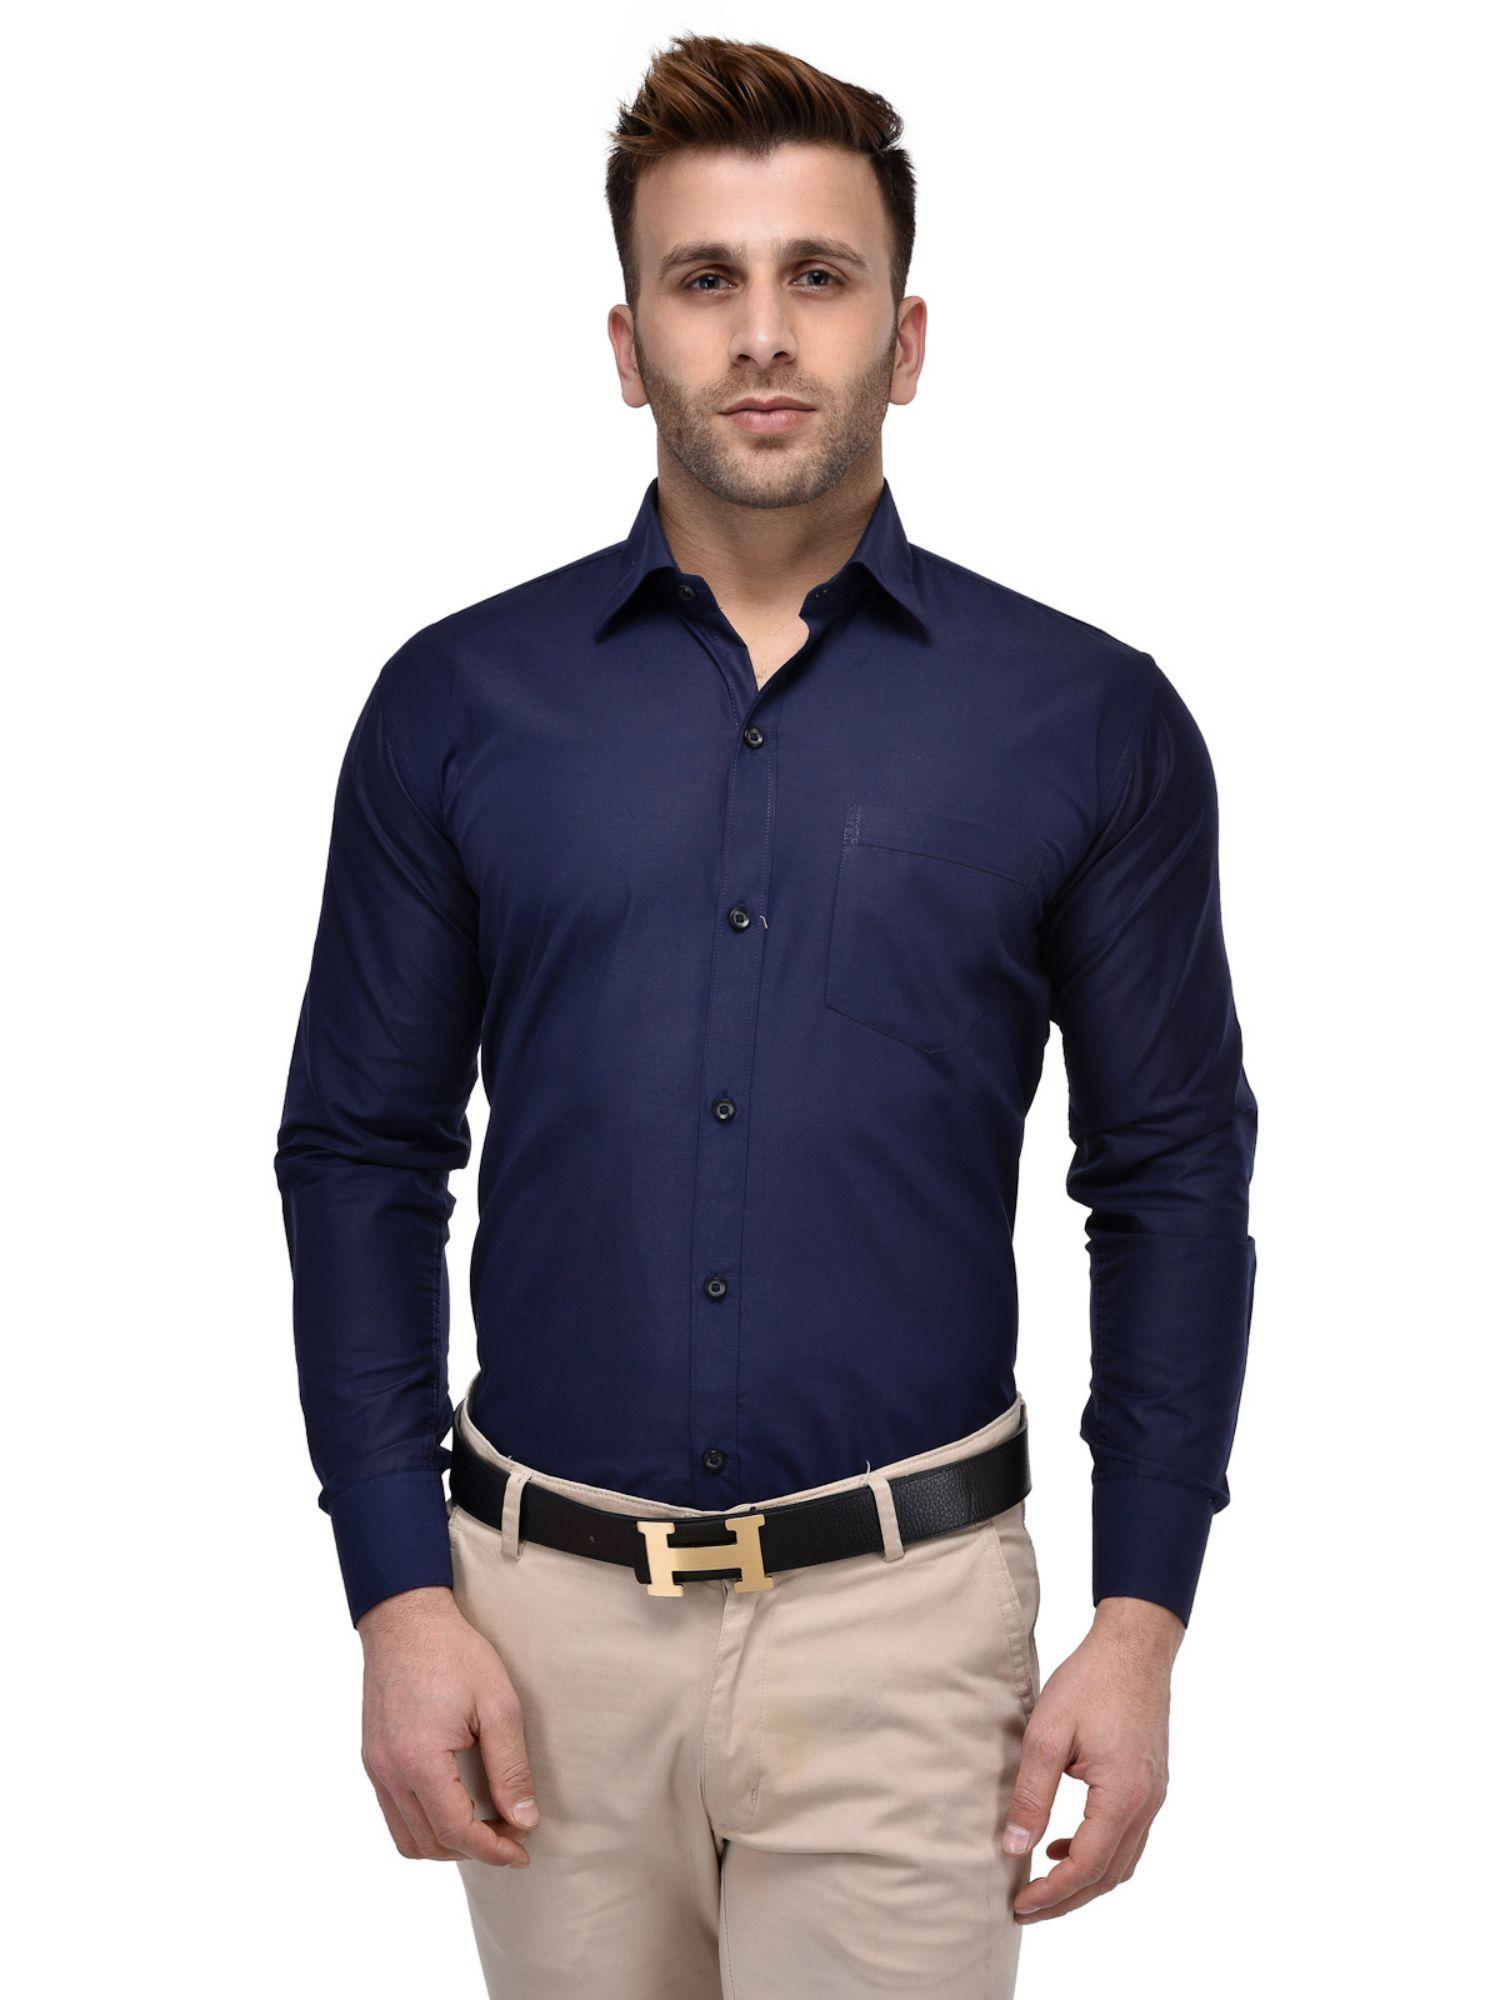 Navy Blue Solid Shirt